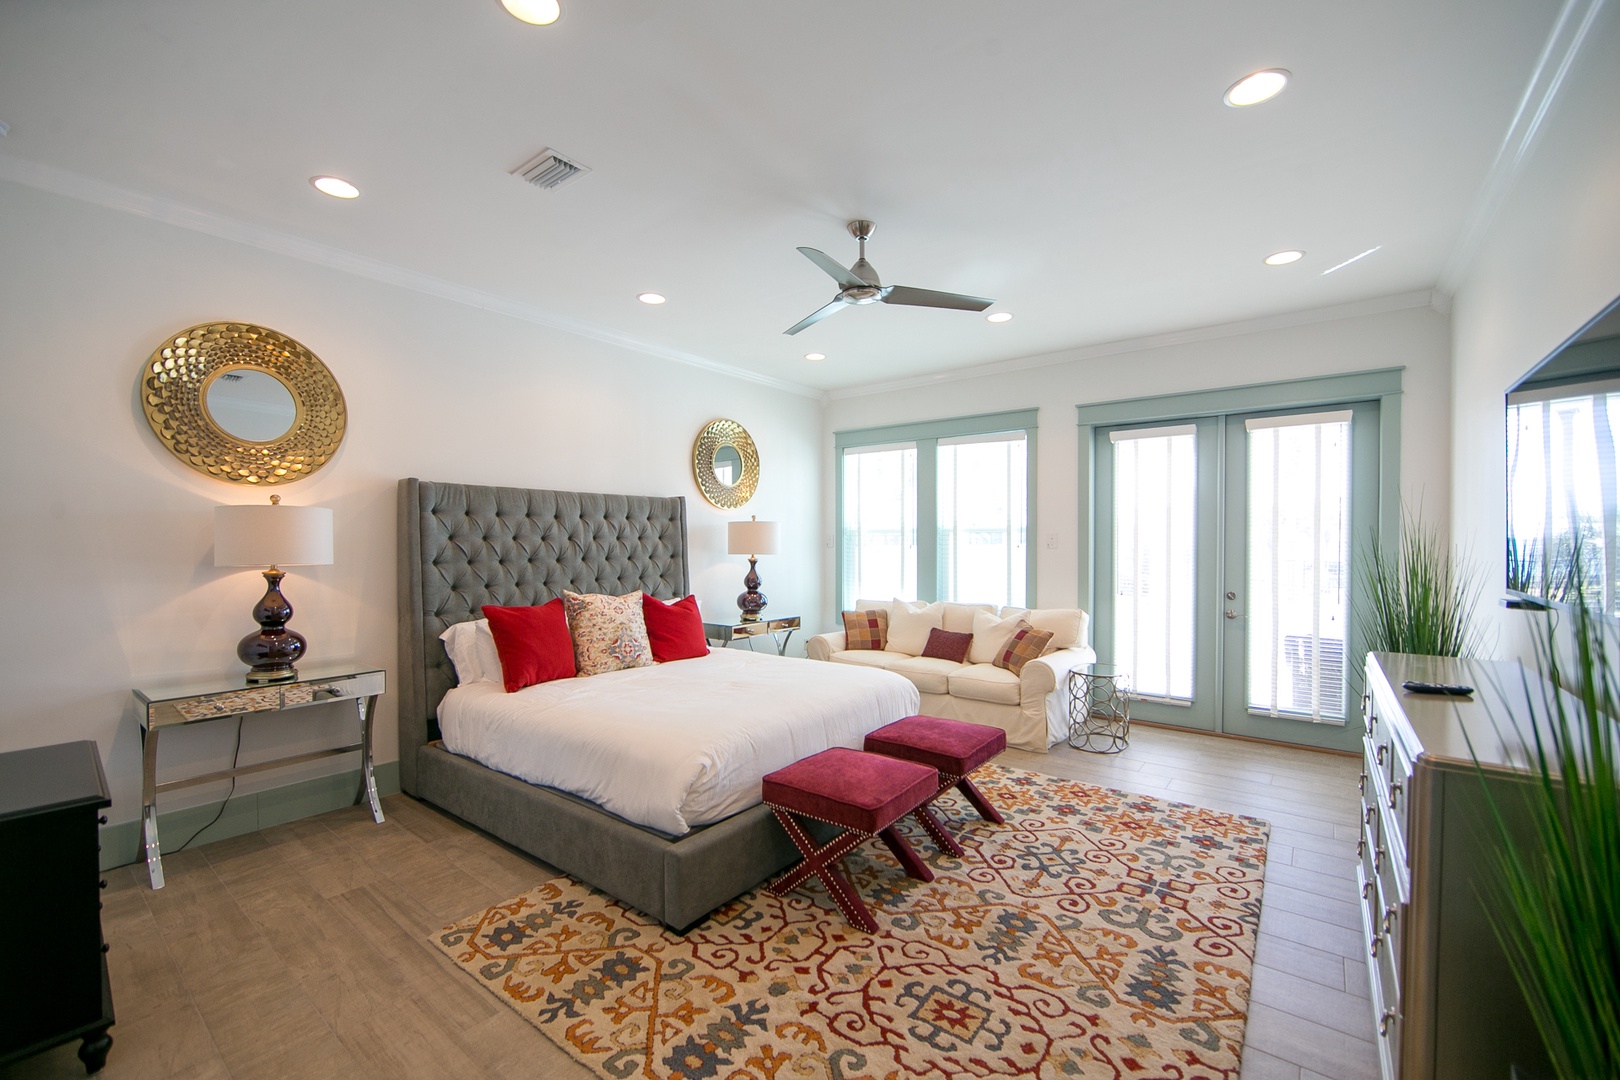 The luxurious master bedroom offers views of the pool & features a huge walk in closet and en suite bathroom!